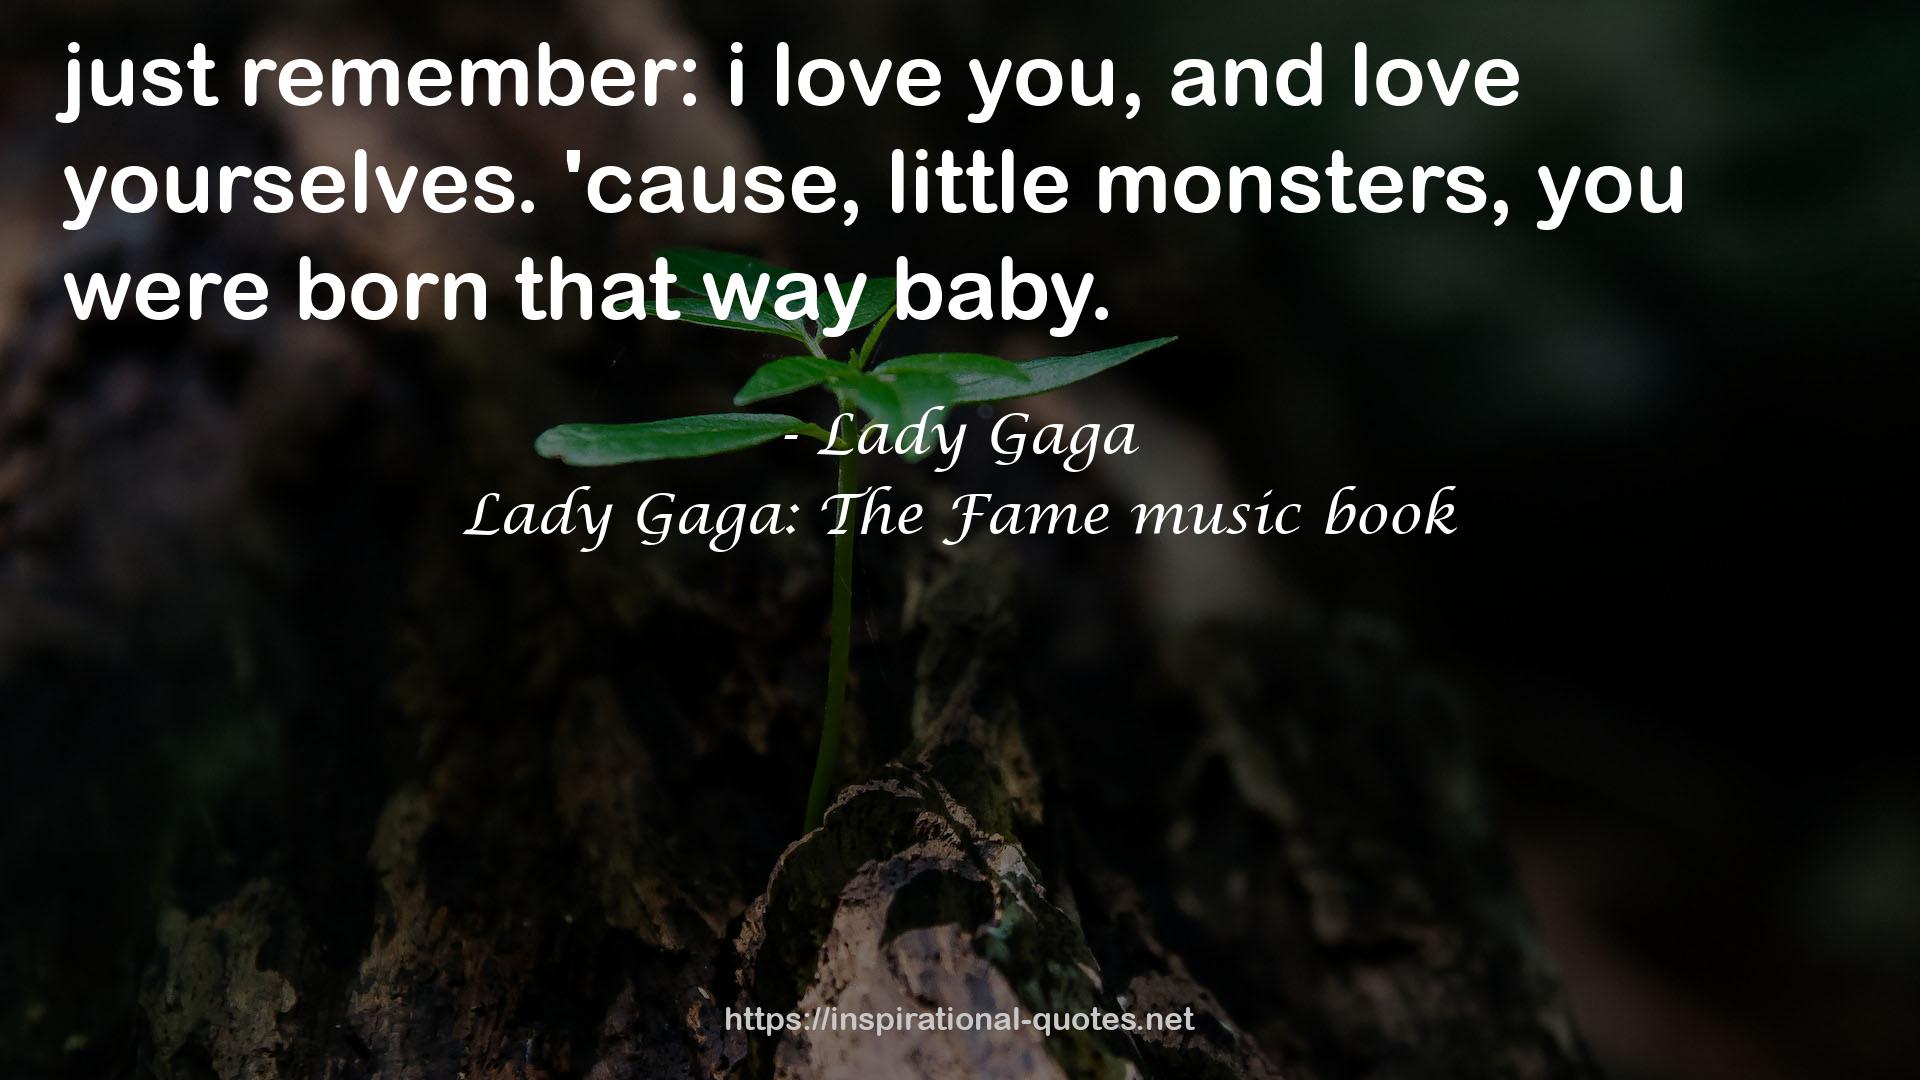 Lady Gaga: The Fame music book QUOTES